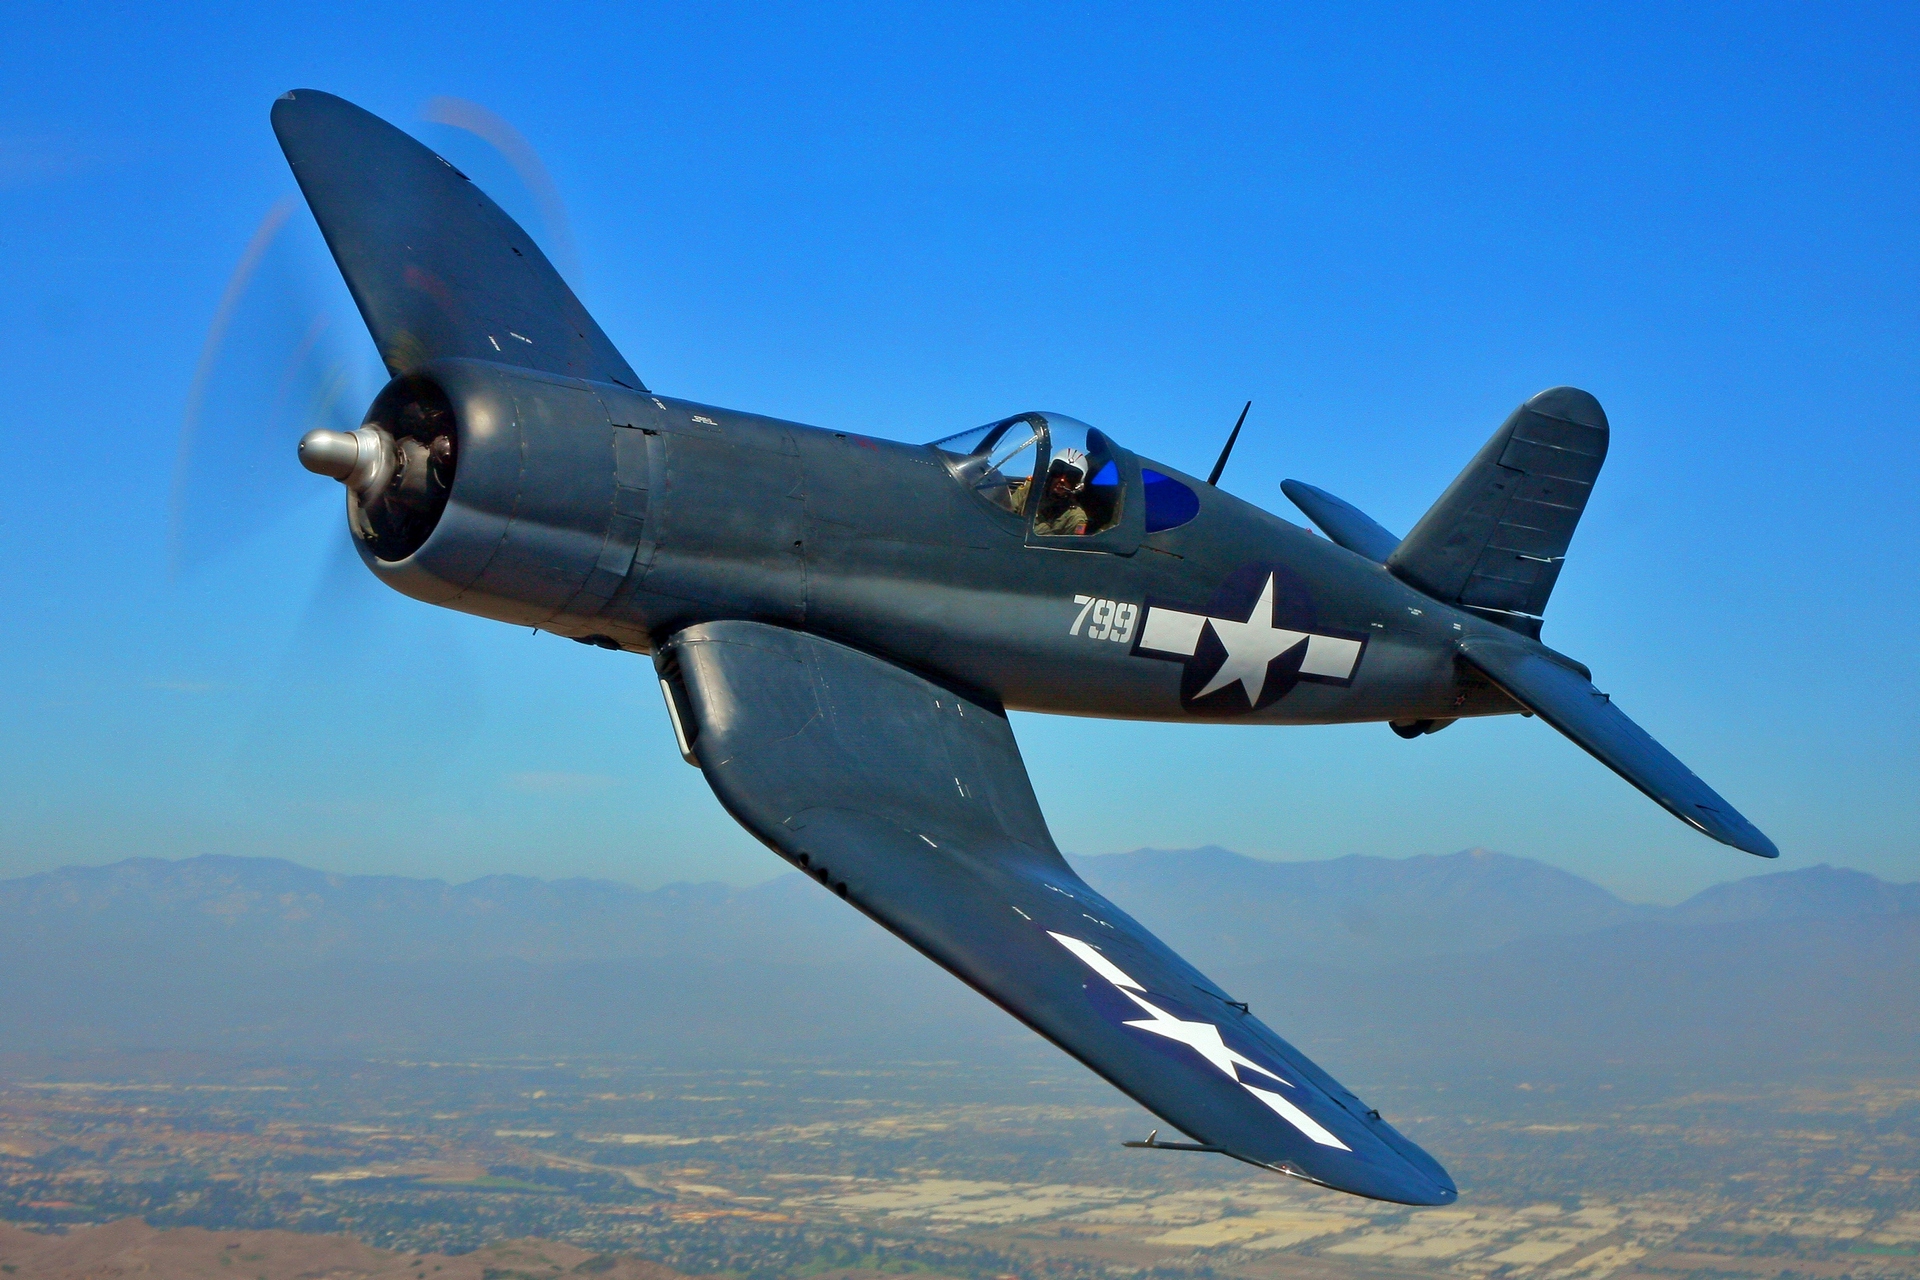 F4u corsair aircraft carrierbased fighter pilot sky military retro vintage  wallpaper  2560x1440  433557  WallpaperUP